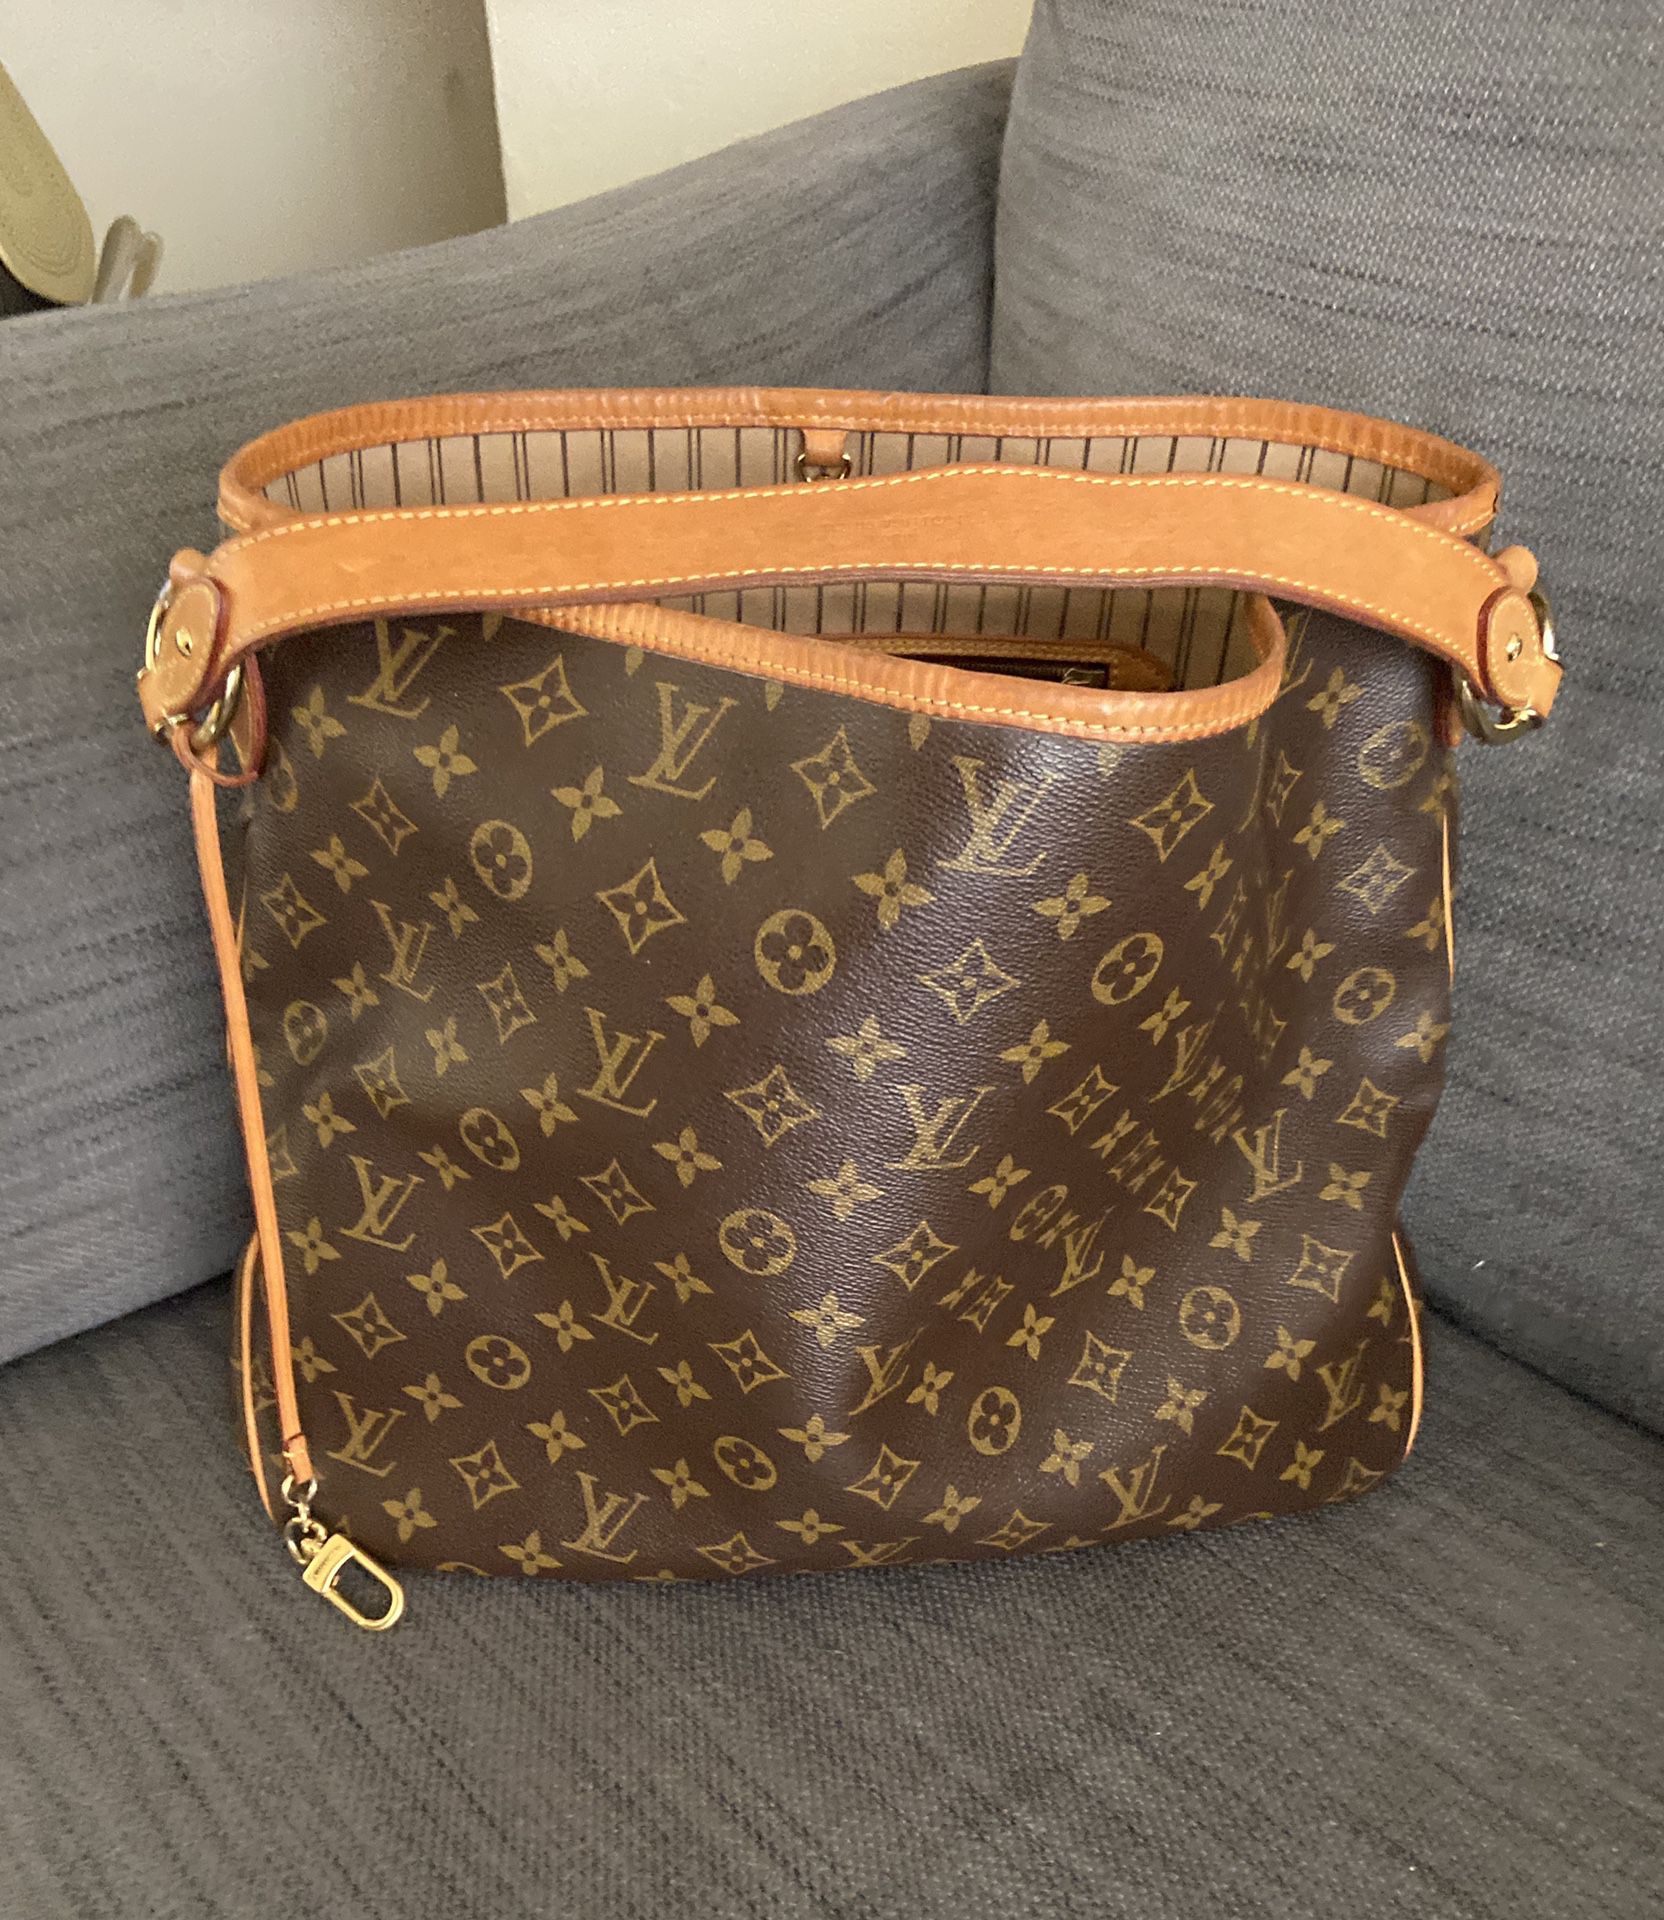 Louis Vuitton Hobo Bag for Sale in San Jose, CA - OfferUp